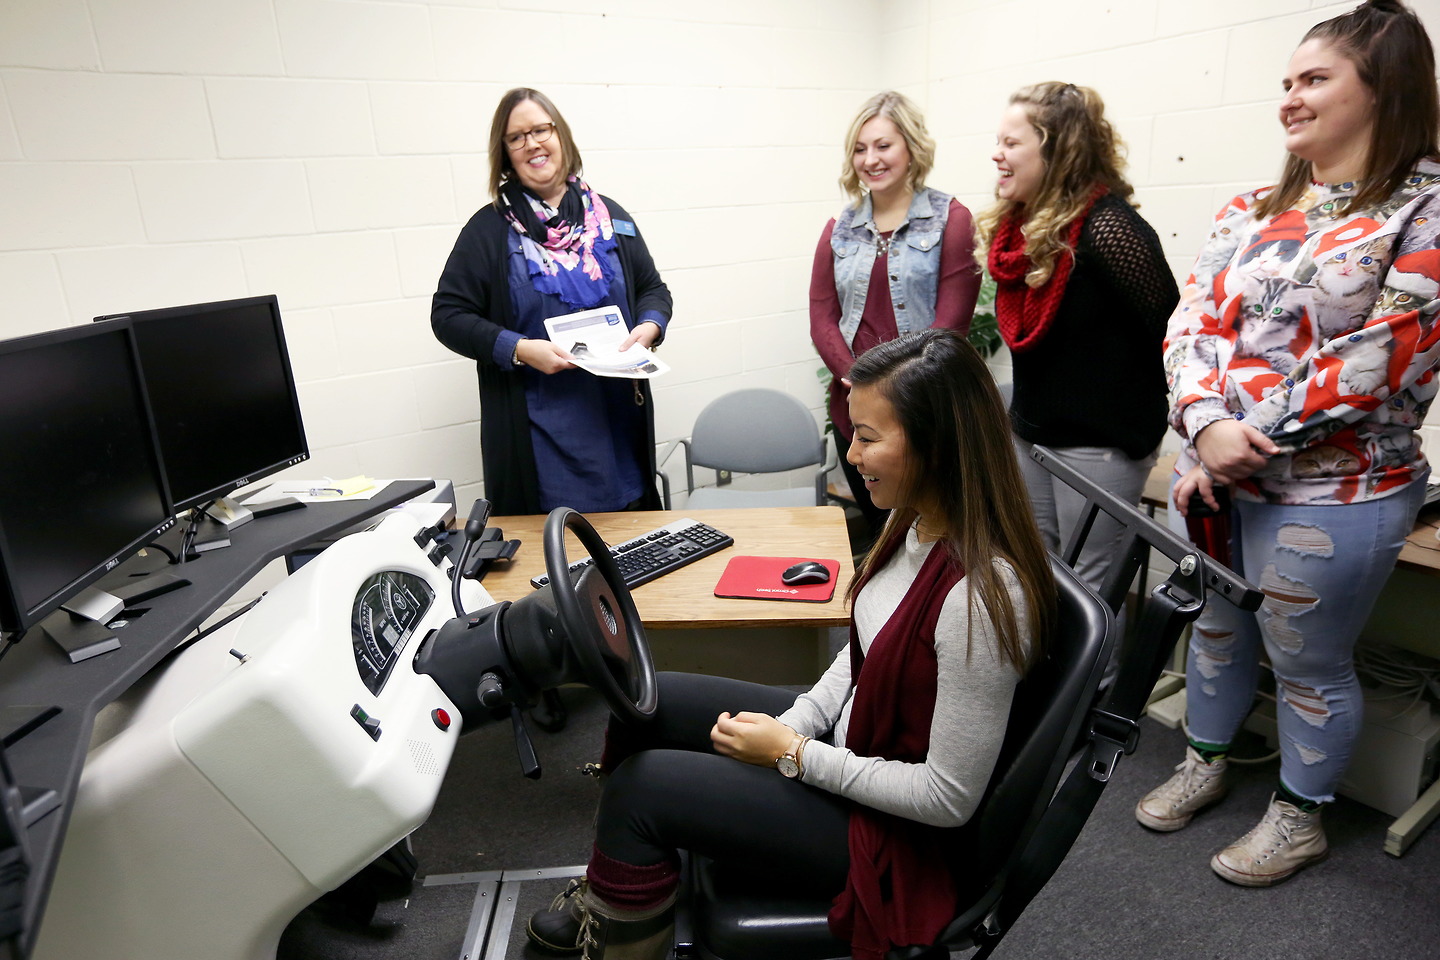 Rehabilitation counseling graduate students learn about assistive technology and independent living during a visit to the Stout Vocational Rehabilitation Institute.